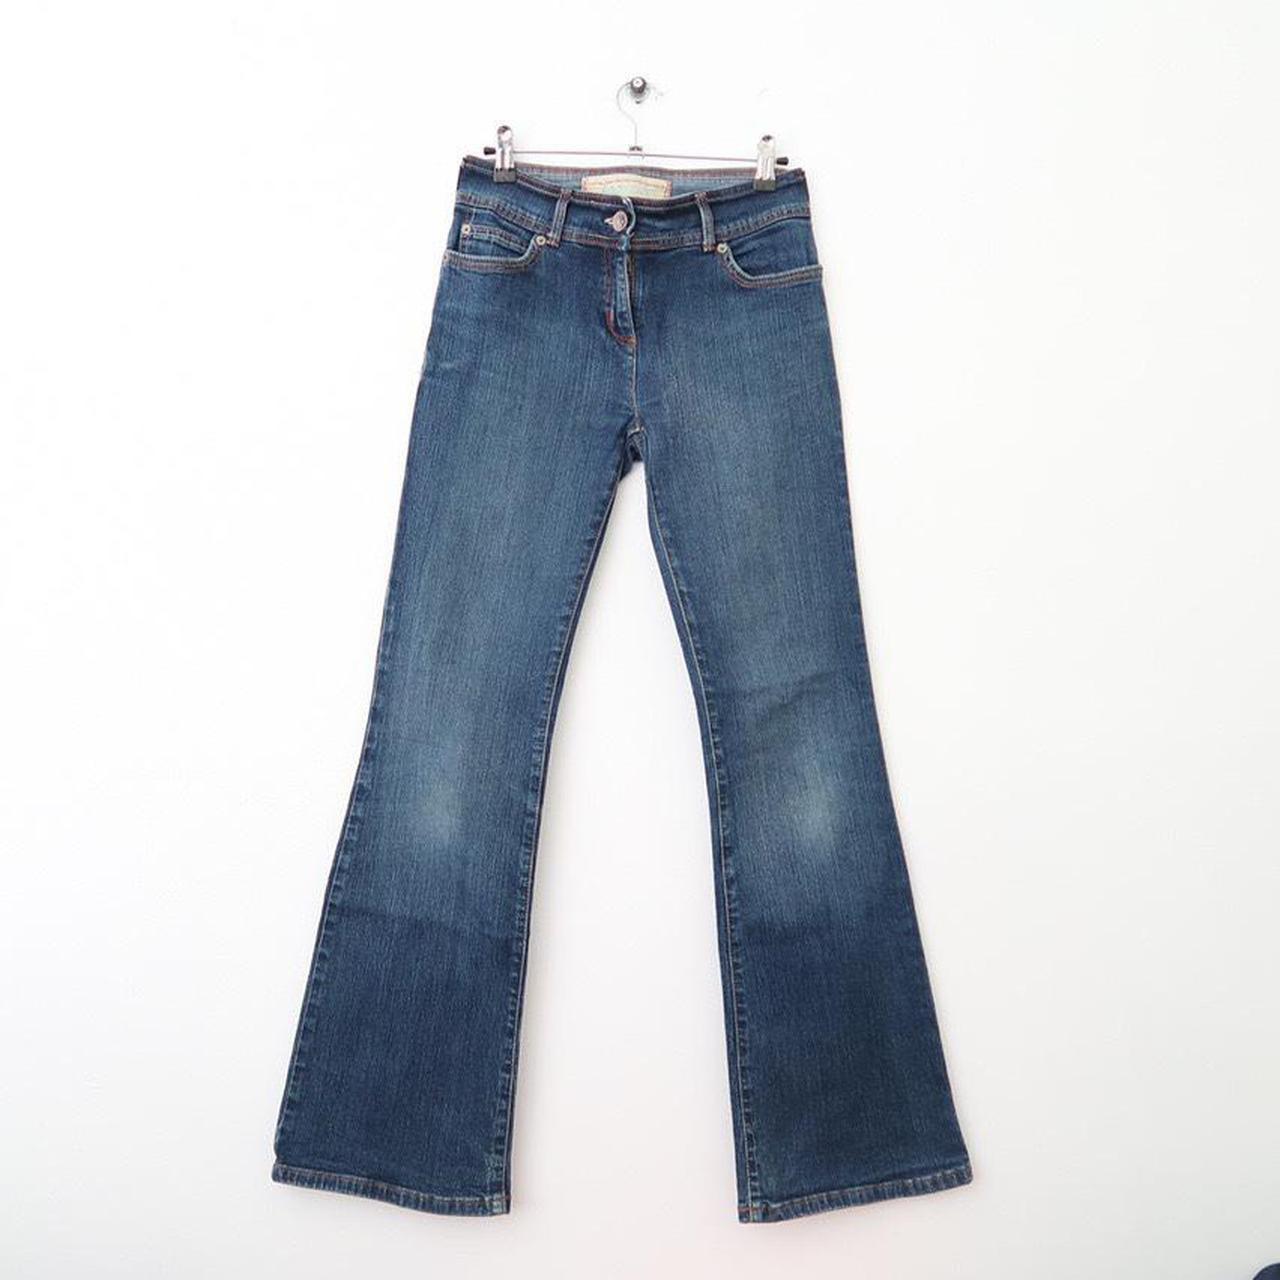 Cute y2k bootcut flared leg jeans with contrast... - Depop